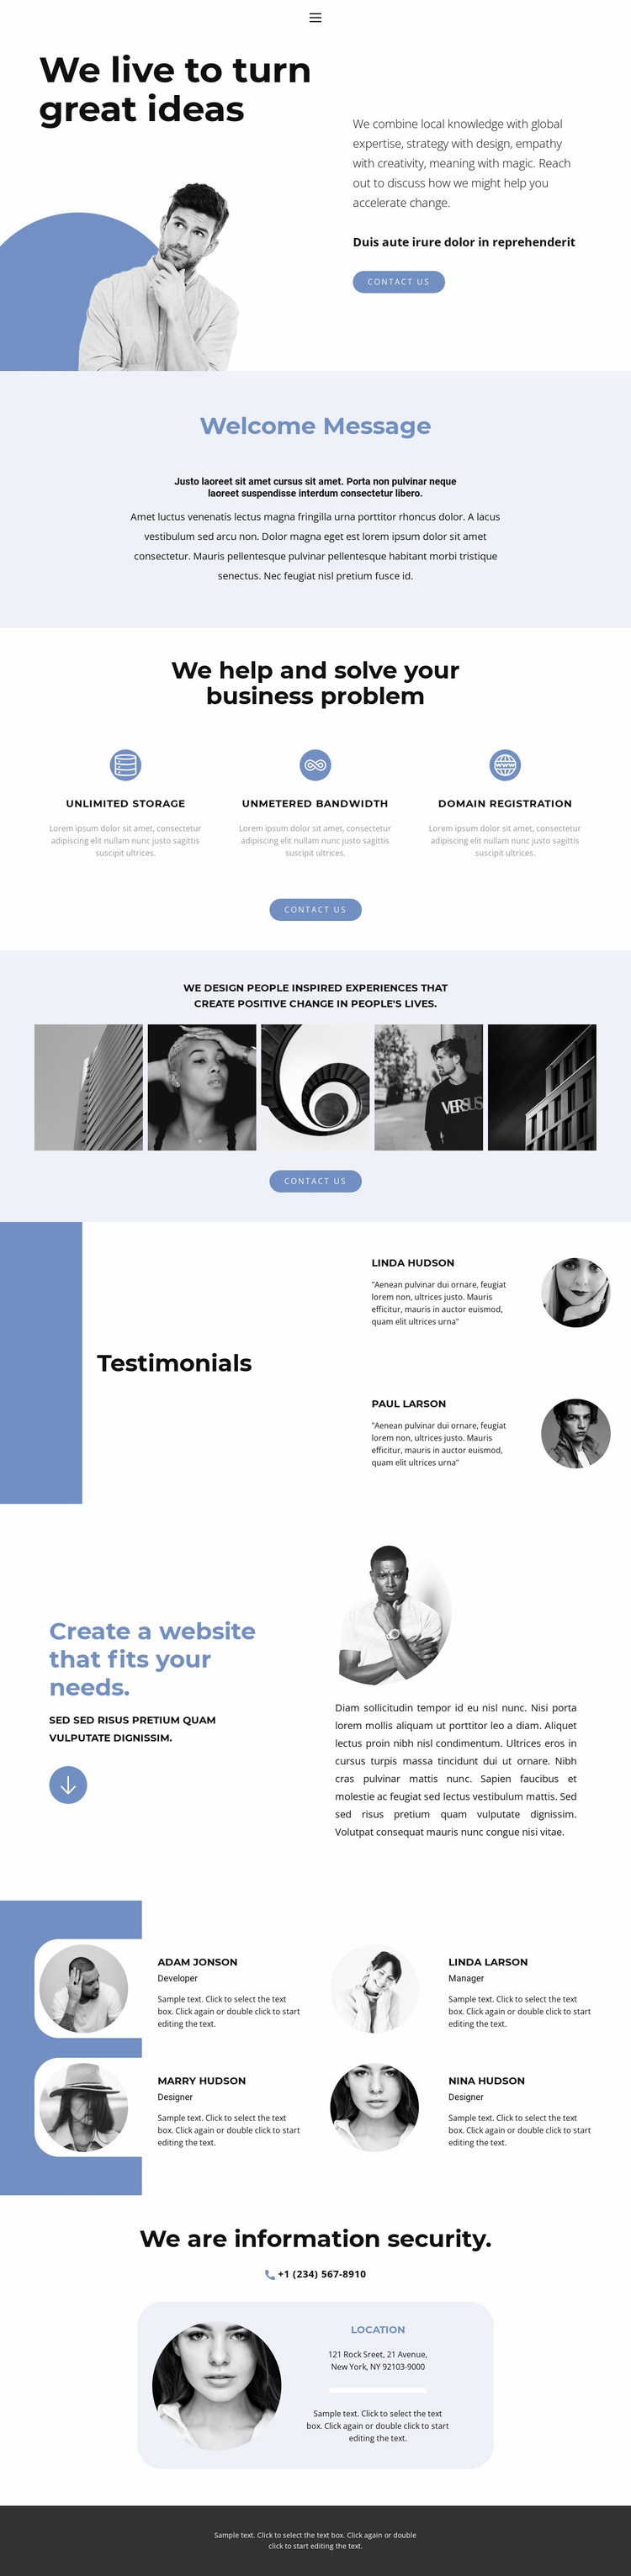 The embodiment of bold ideas Website Builder Templates